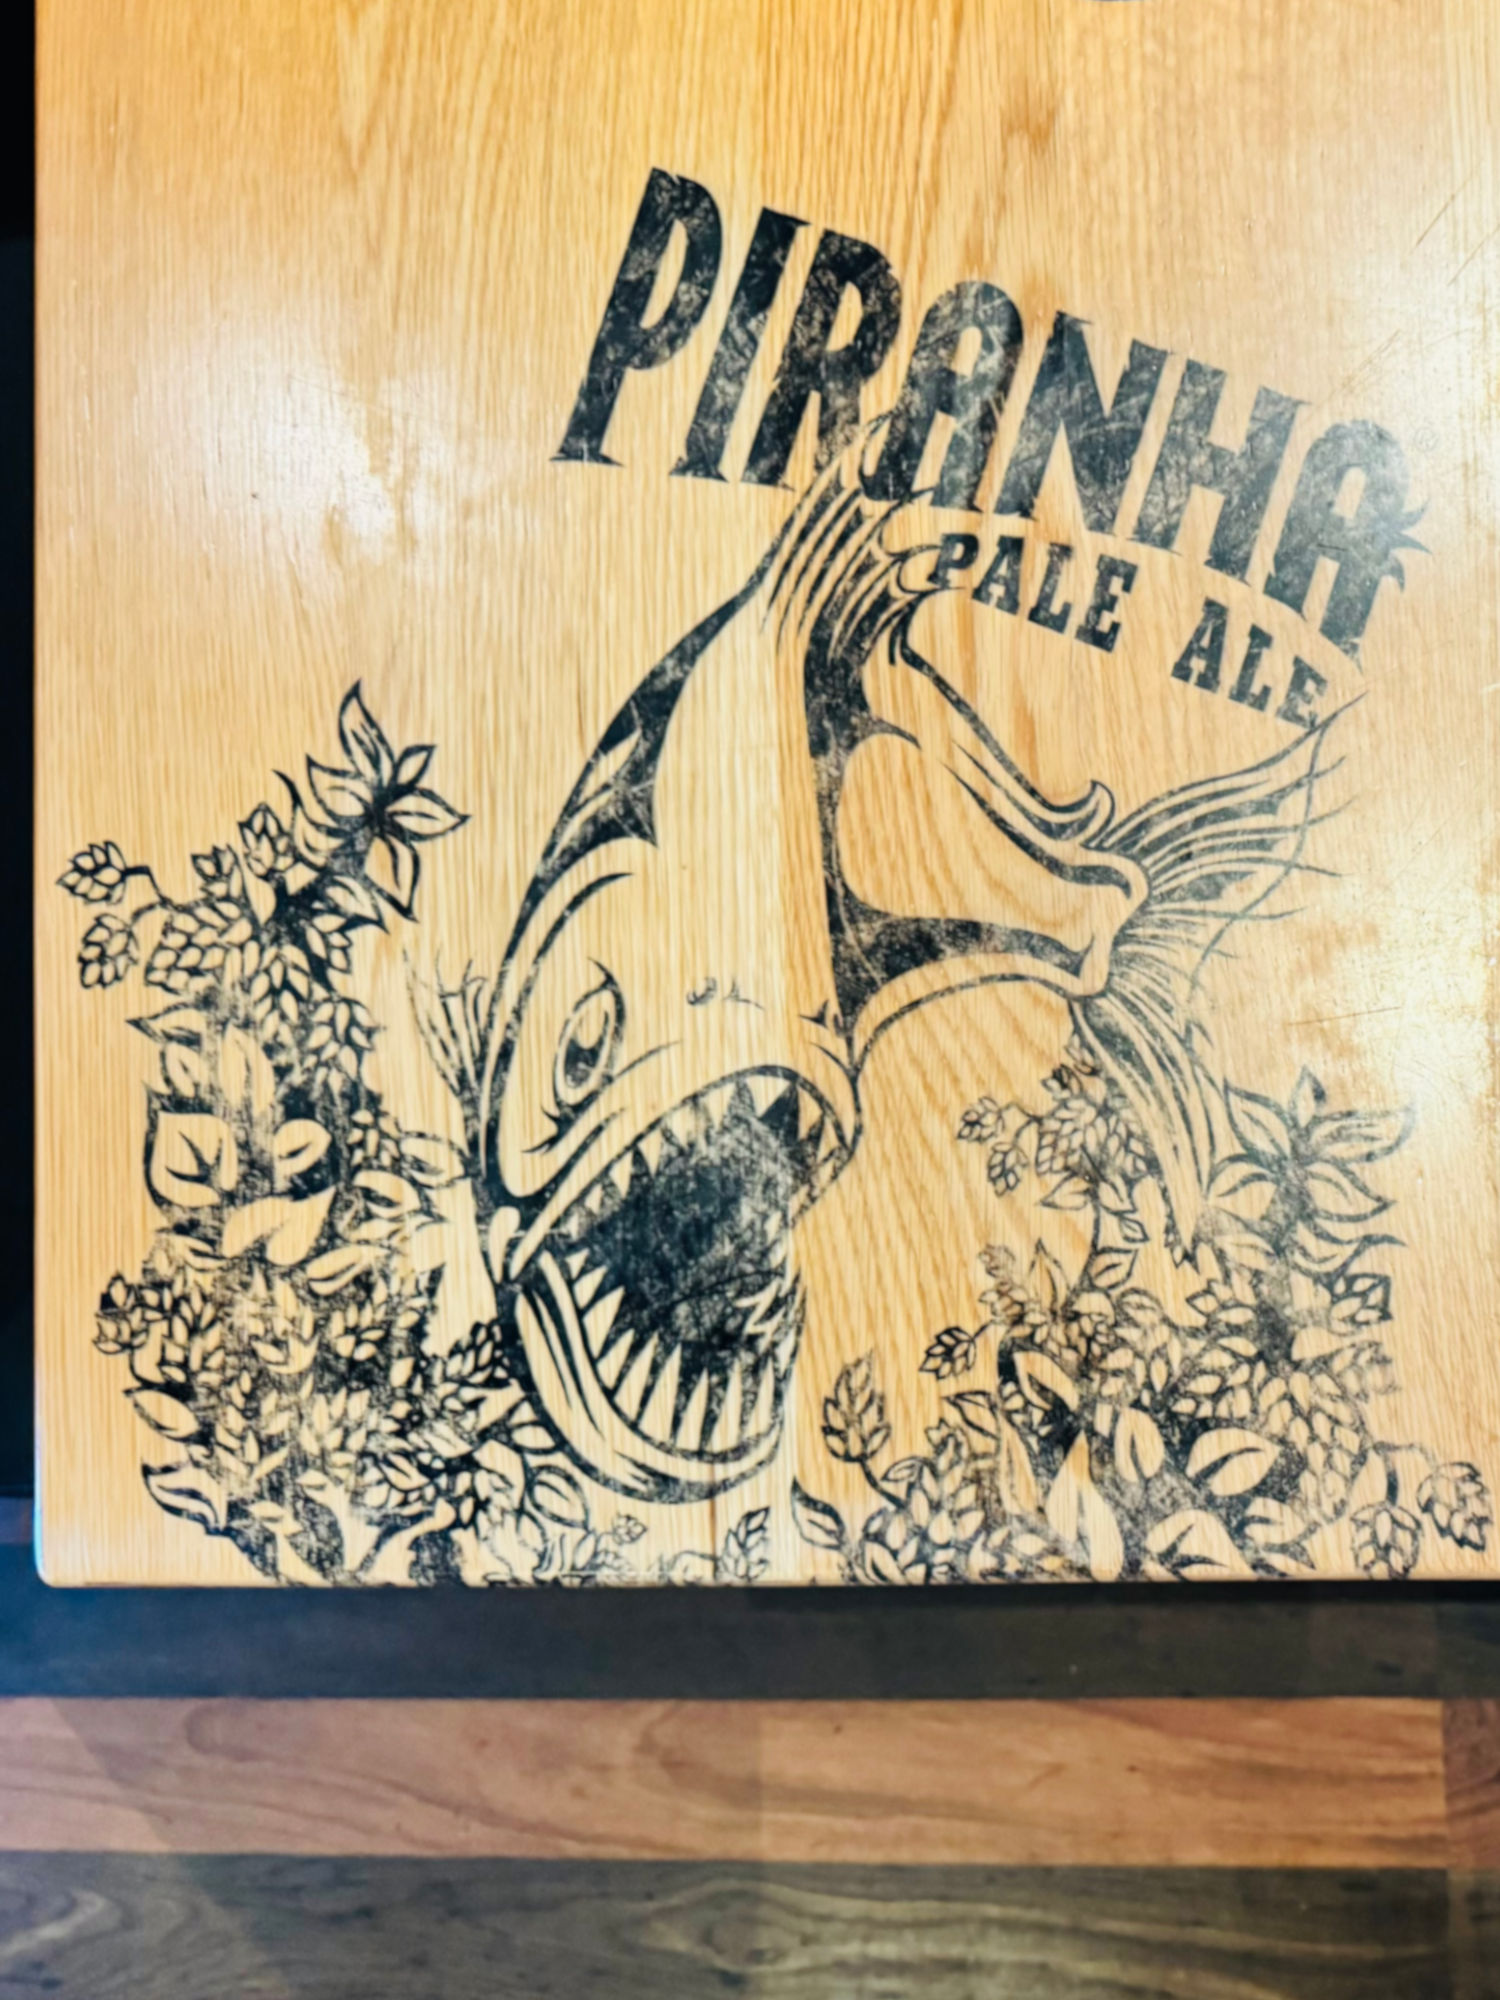 BJ's Brewhouse Piranha Pale Ale Table